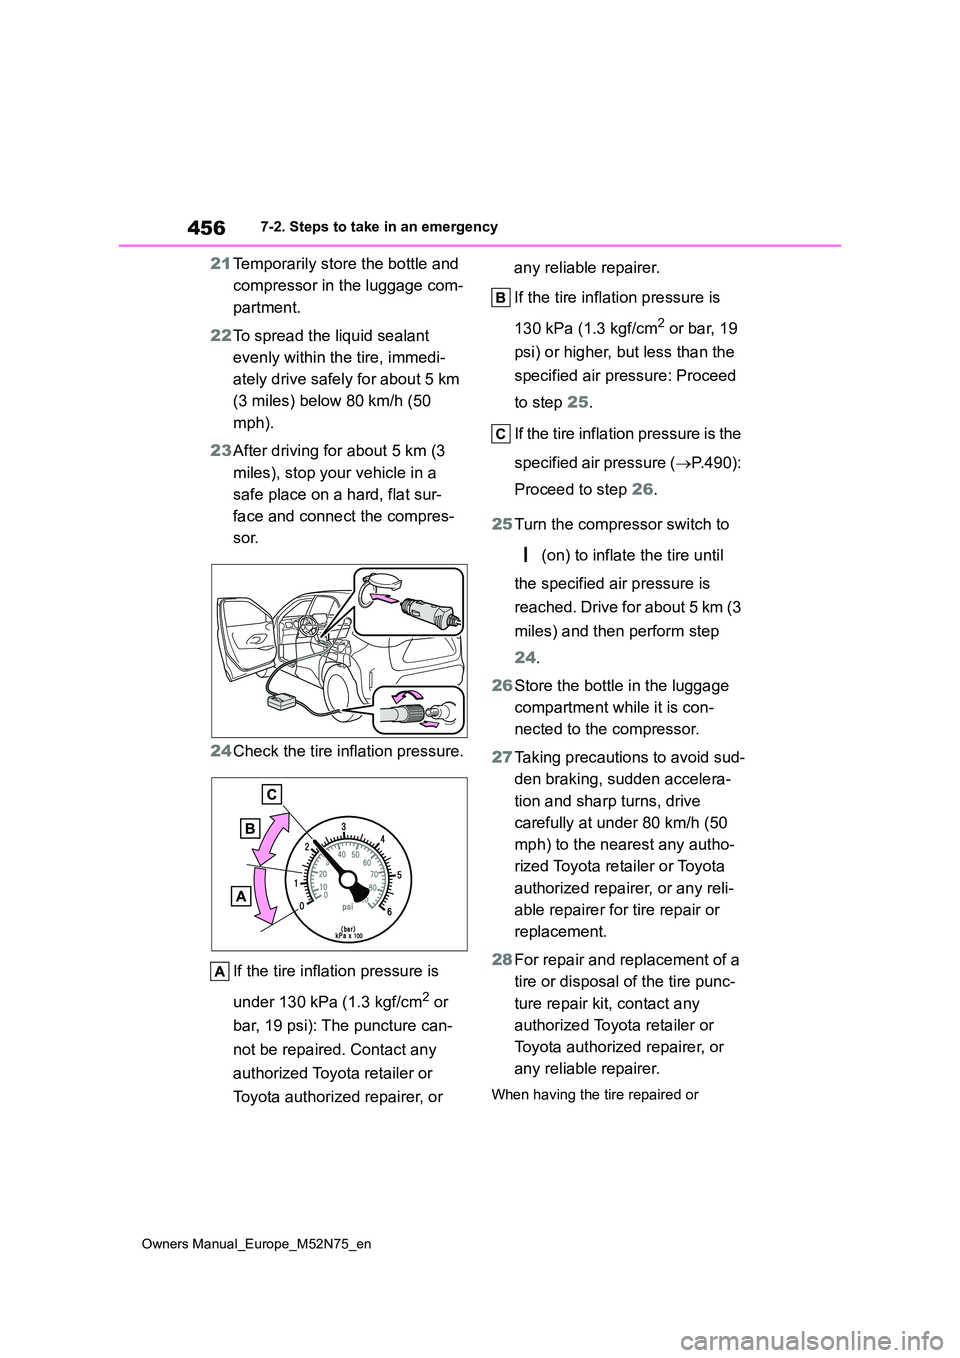 TOYOTA YARIS CROSS 2023 Service Manual 456
Owners Manual_Europe_M52N75_en
7-2. Steps to take in an emergency
21Temporarily store the bottle and  
compressor in the luggage com- 
partment. 
22 To spread the liquid sealant  
evenly within th